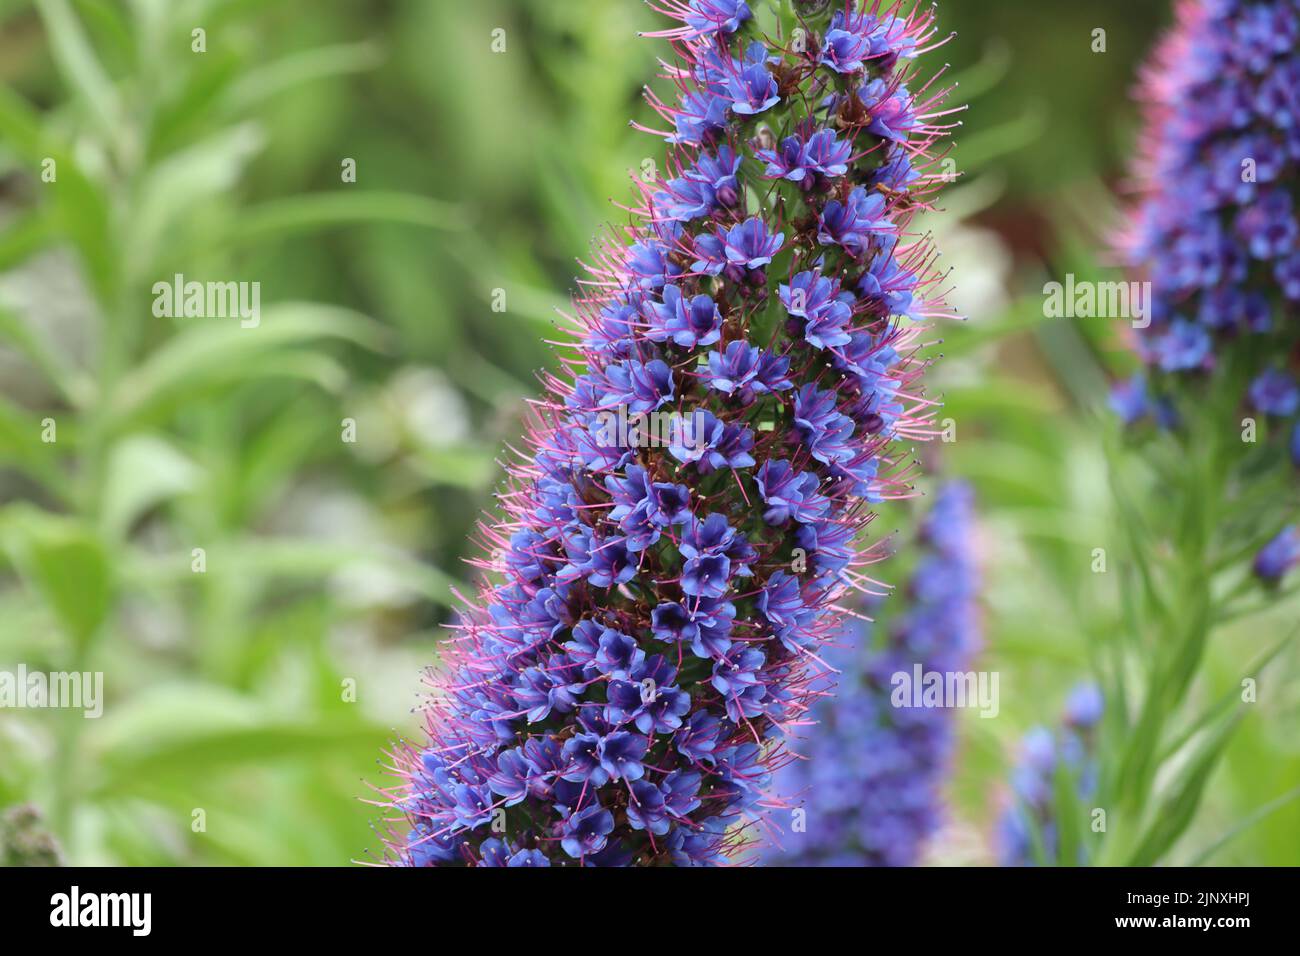 Close up of a Pride of Madeira blossom in an English country garden. It produces masses of vivid purple-blue flower spikes in early summer. Stock Photo